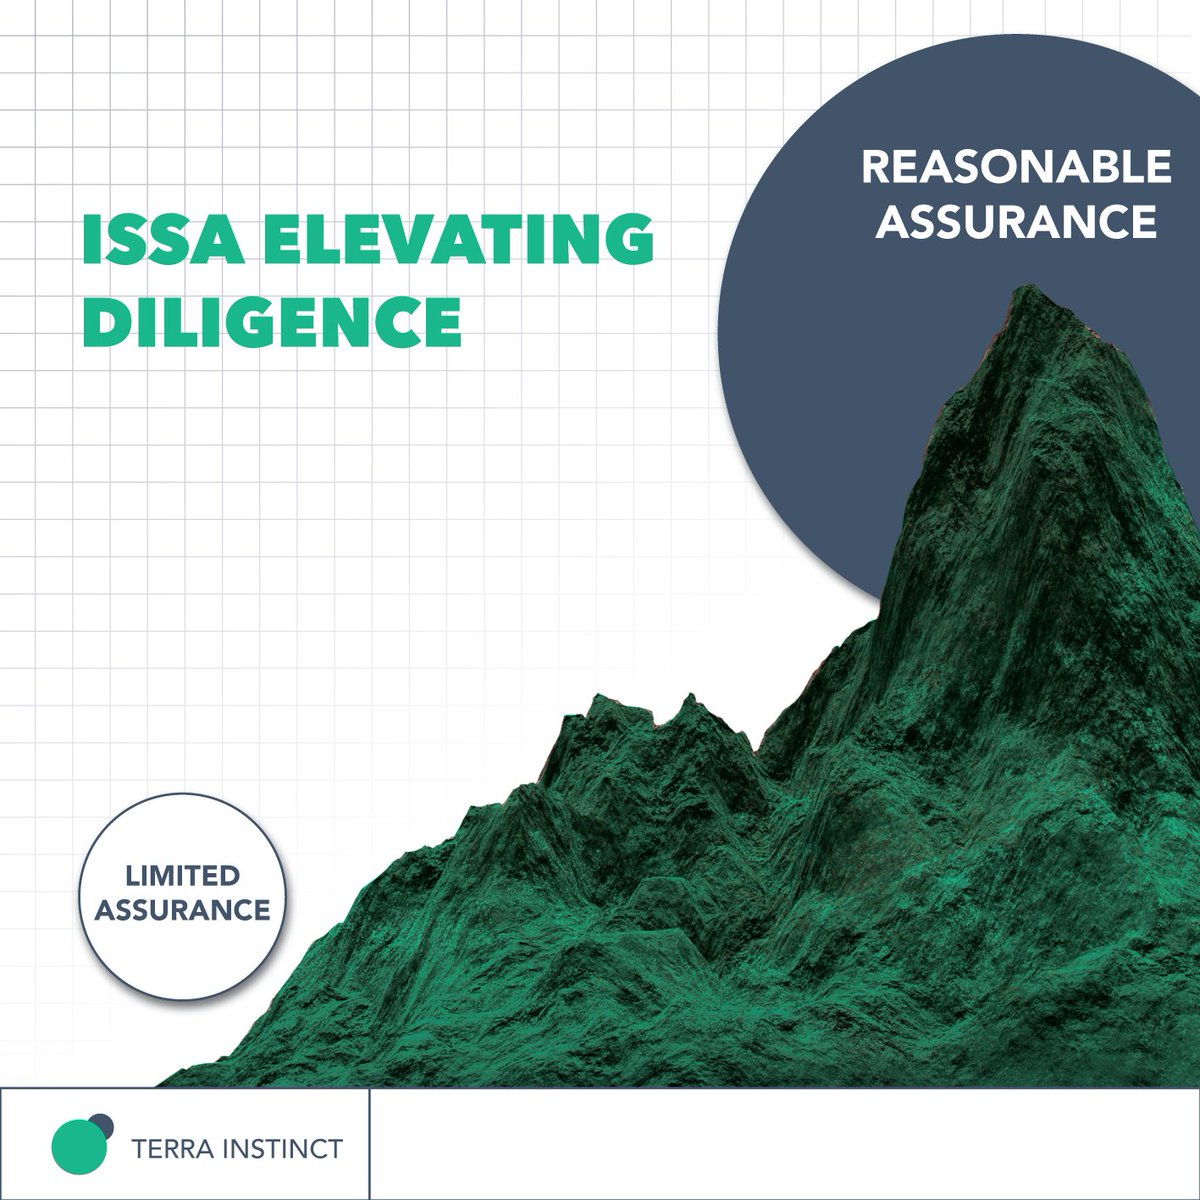 The shift from limited to reasonable assurance in #sustainability reporting is here! ISSA 5000 paves the way for enhanced credibility and reliability in #ESG disclosures. 

Learn more: terrainstinct.com/mandating-sust…

 #ISSA5000 #SustainabilityAssurance #ReasonableAssurance